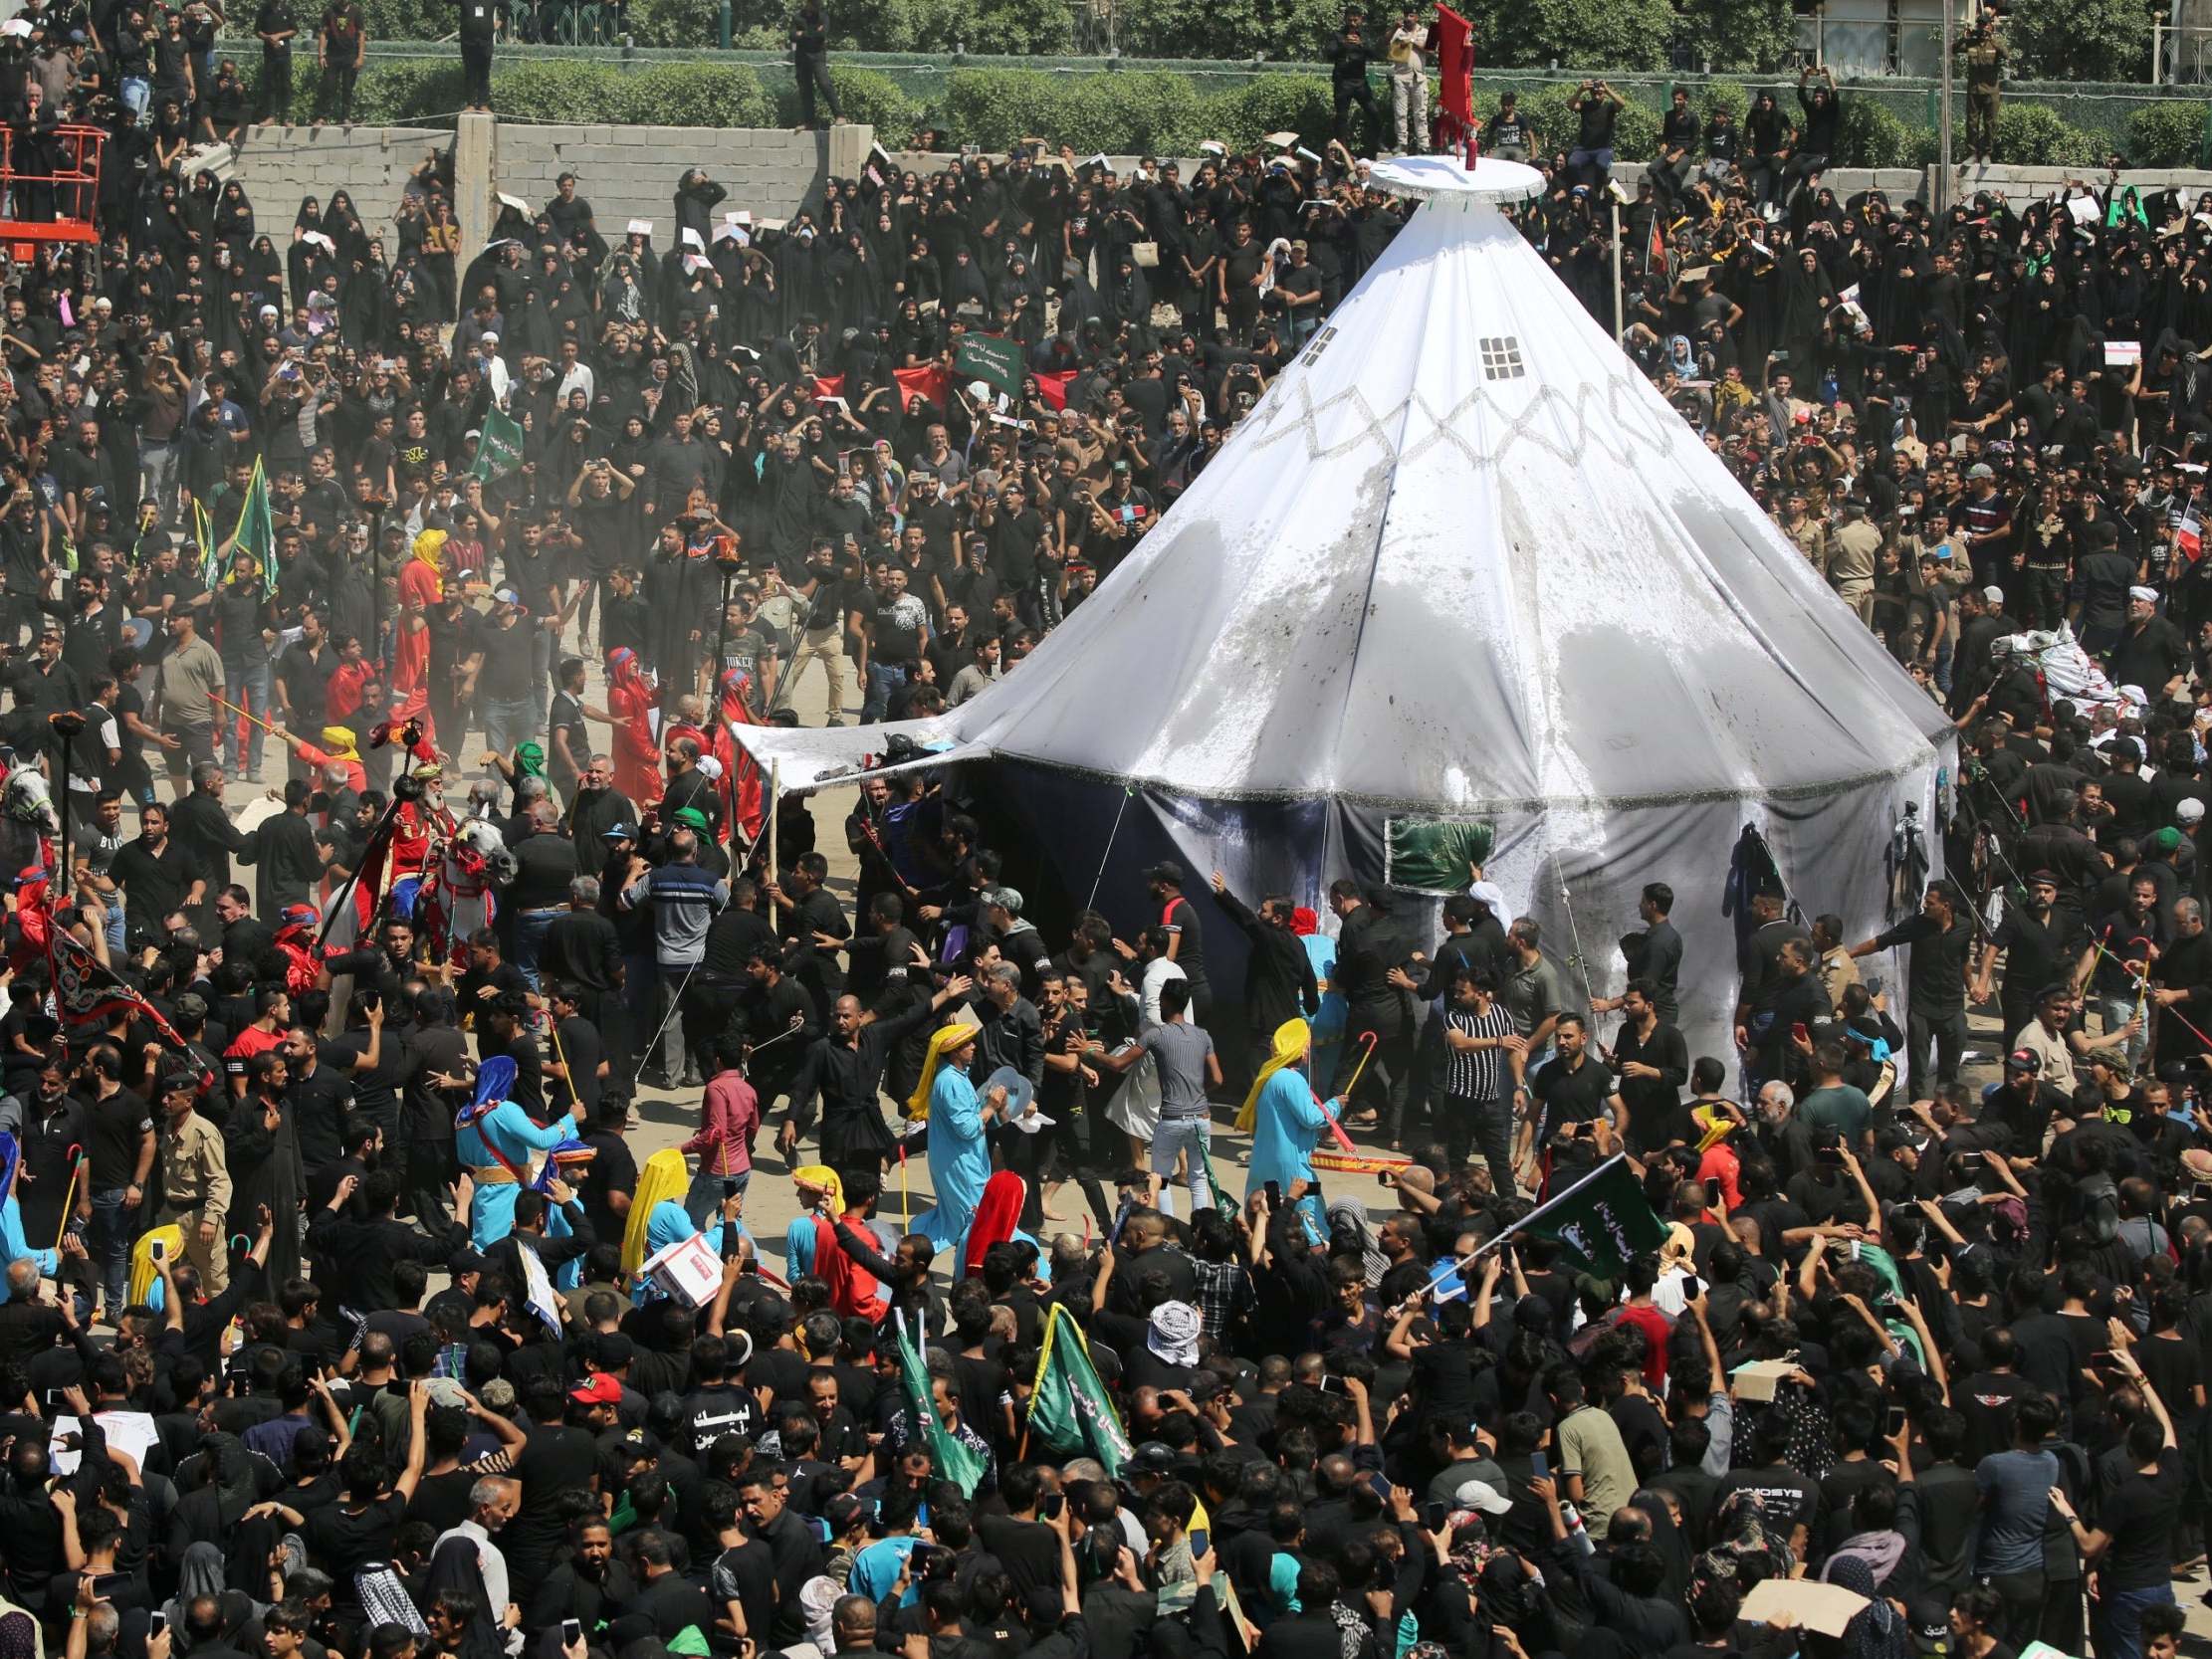 Iraqi Shia Muslims gather around a tent as they re-enact a scene as part of the Ashura ceremony in Kerbala